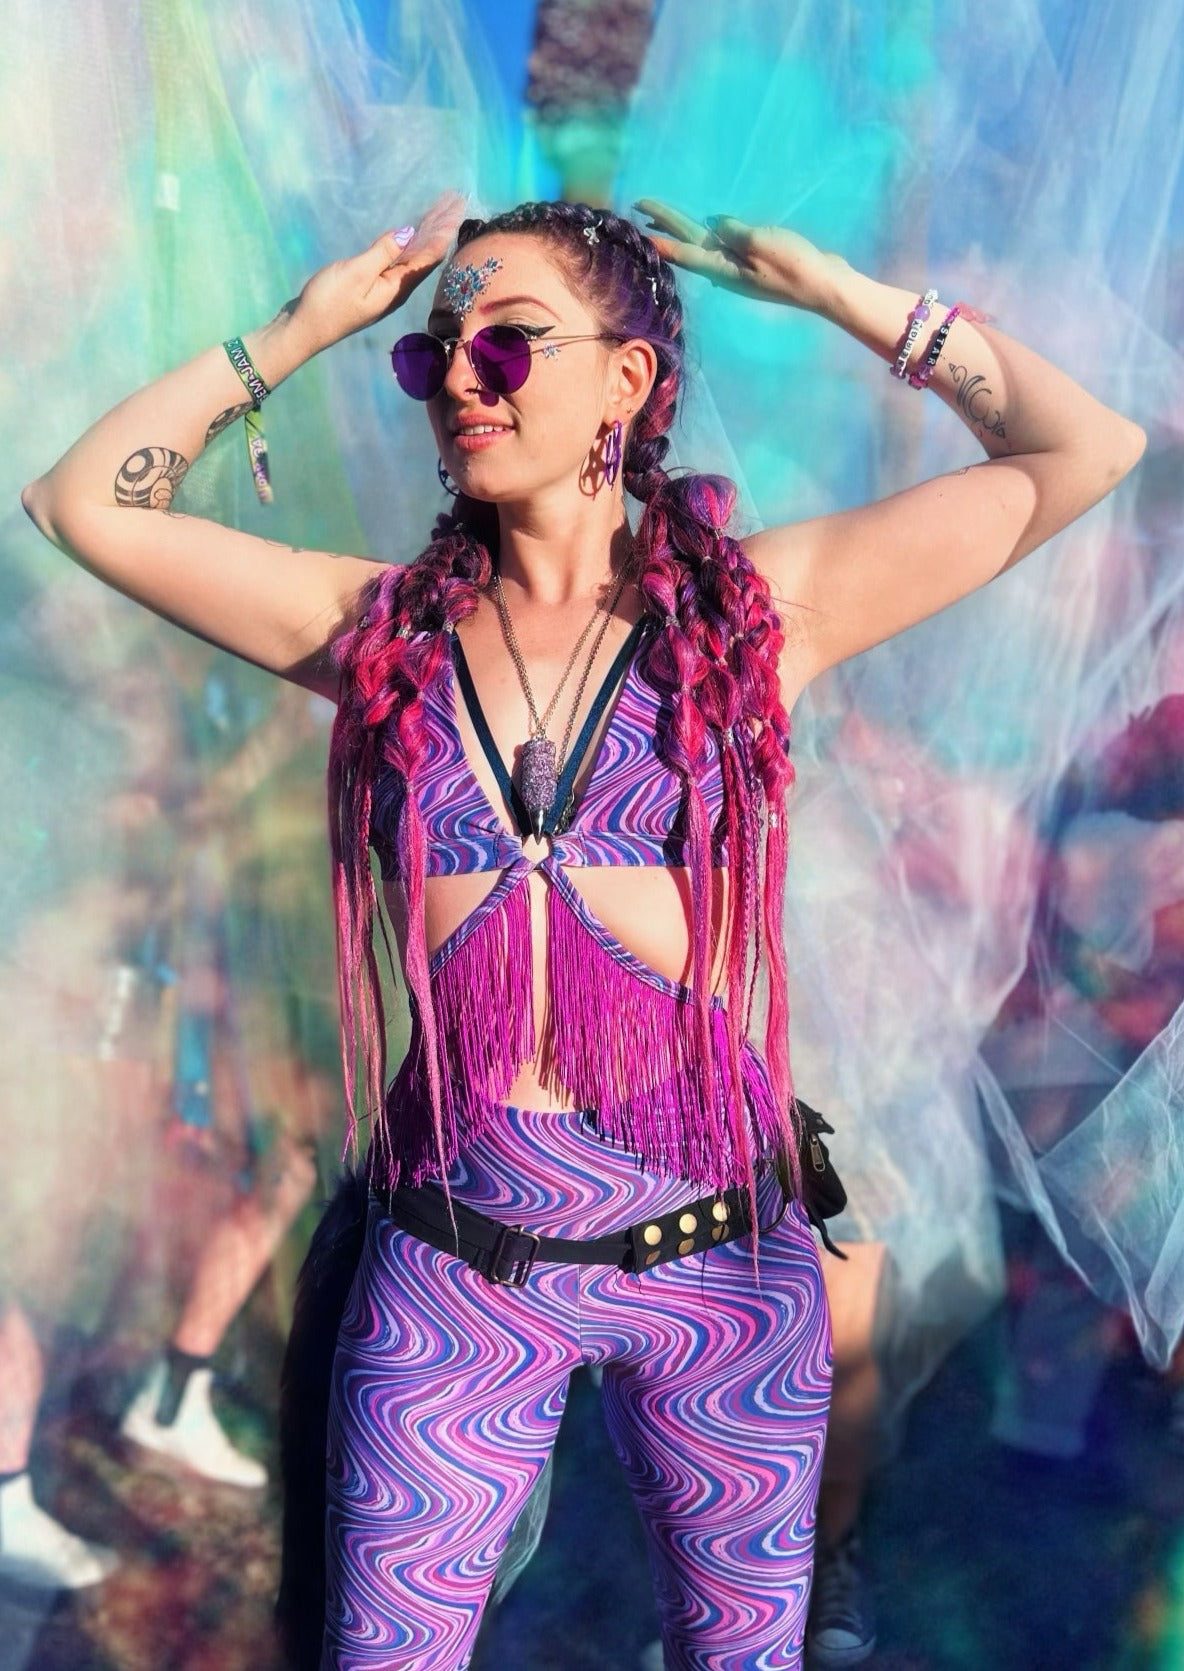 Purple Psychedelic Swirl - Womens music fesival fashion - Festival-outfit-rave-outfit - handmade-in-Brooklyn-New York City-custom made-waste conscious– retro style – hippie fashion –rave bralette top – festival top - Lone Starlette Top – removable fringe accessory 